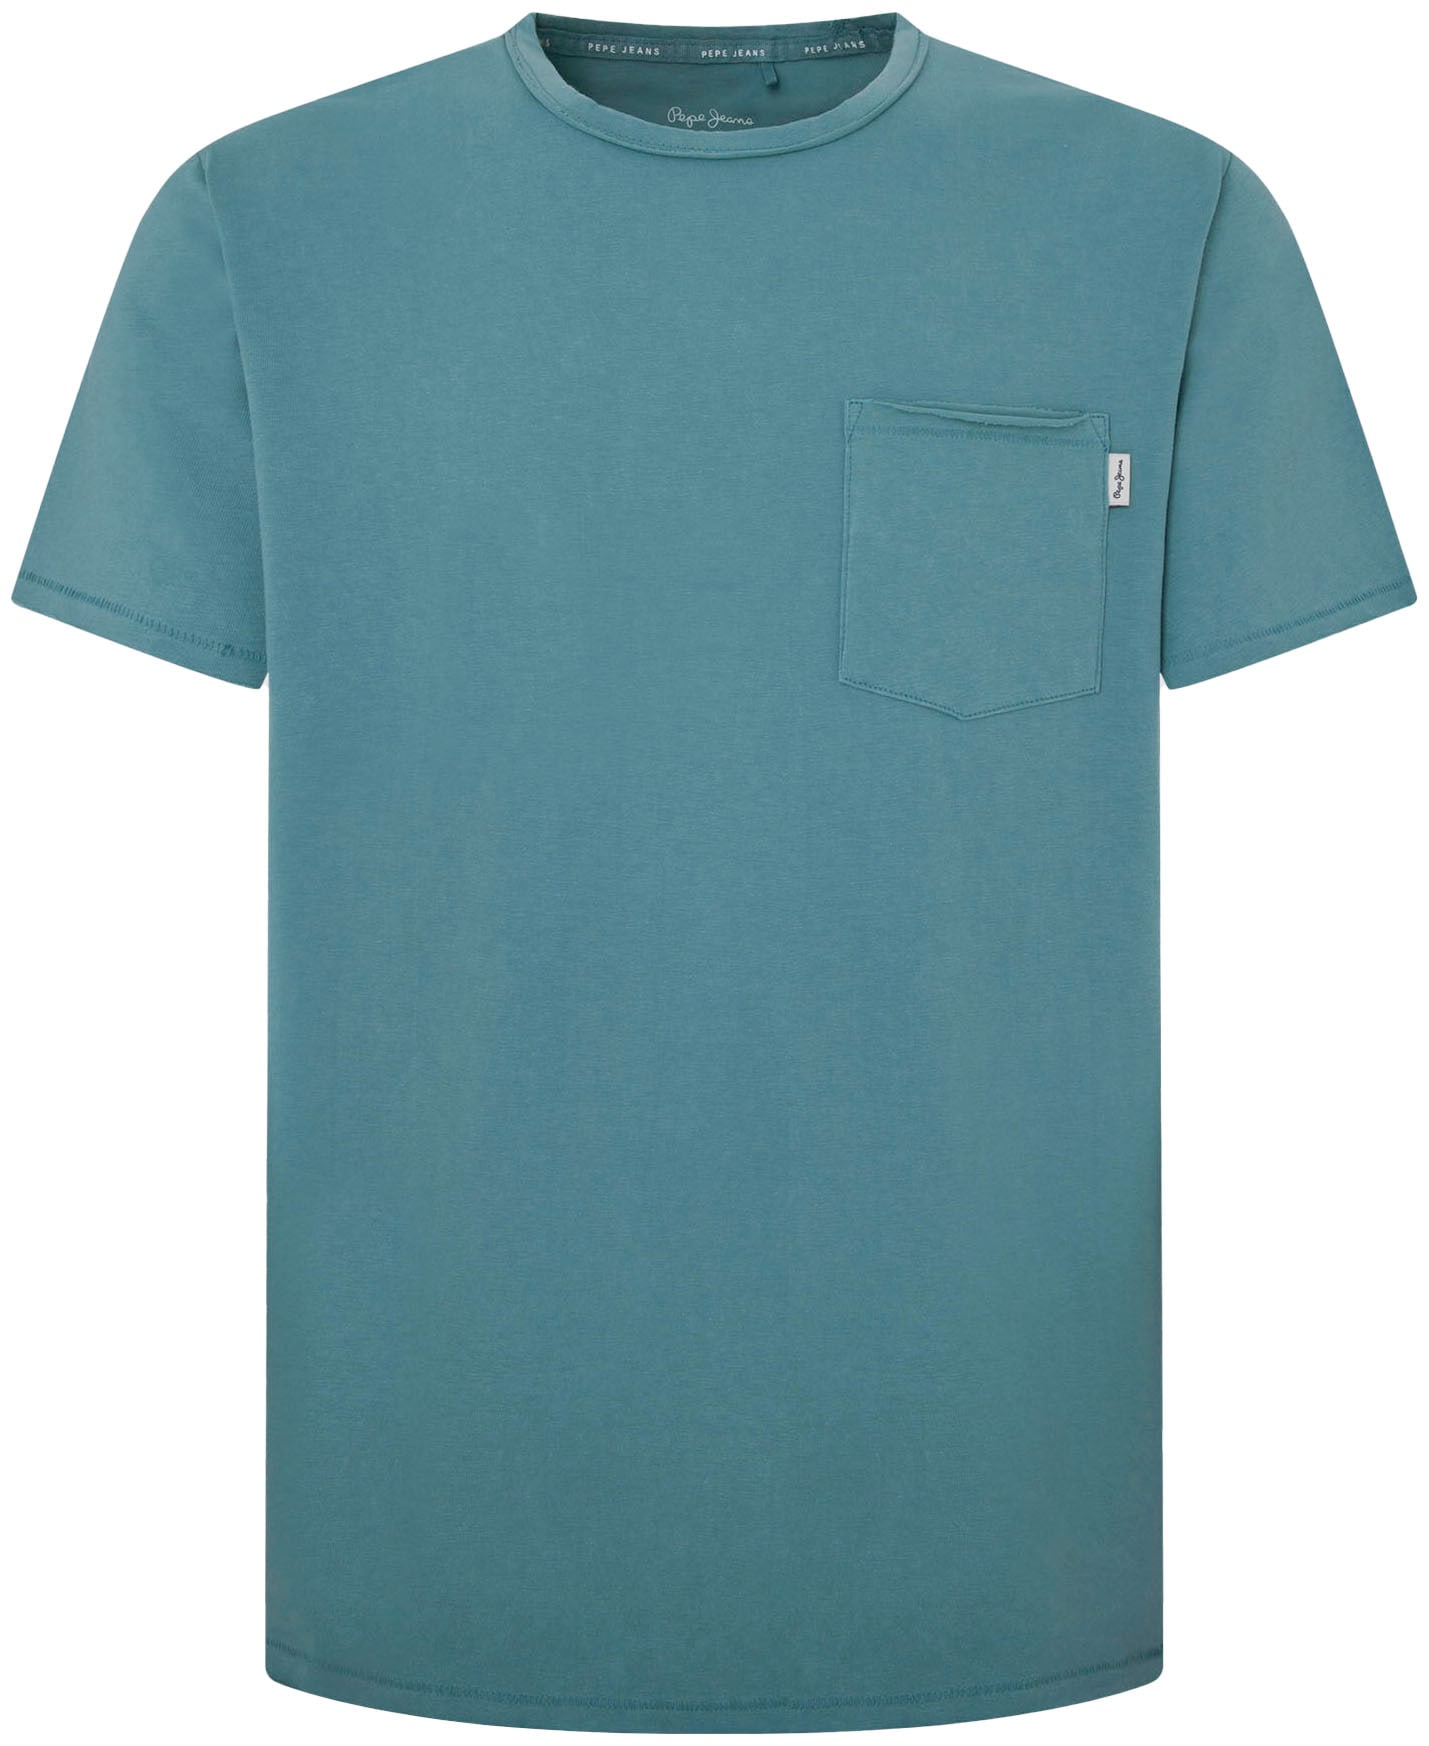 Pepe Jeans T-Shirt von Pepe Jeans